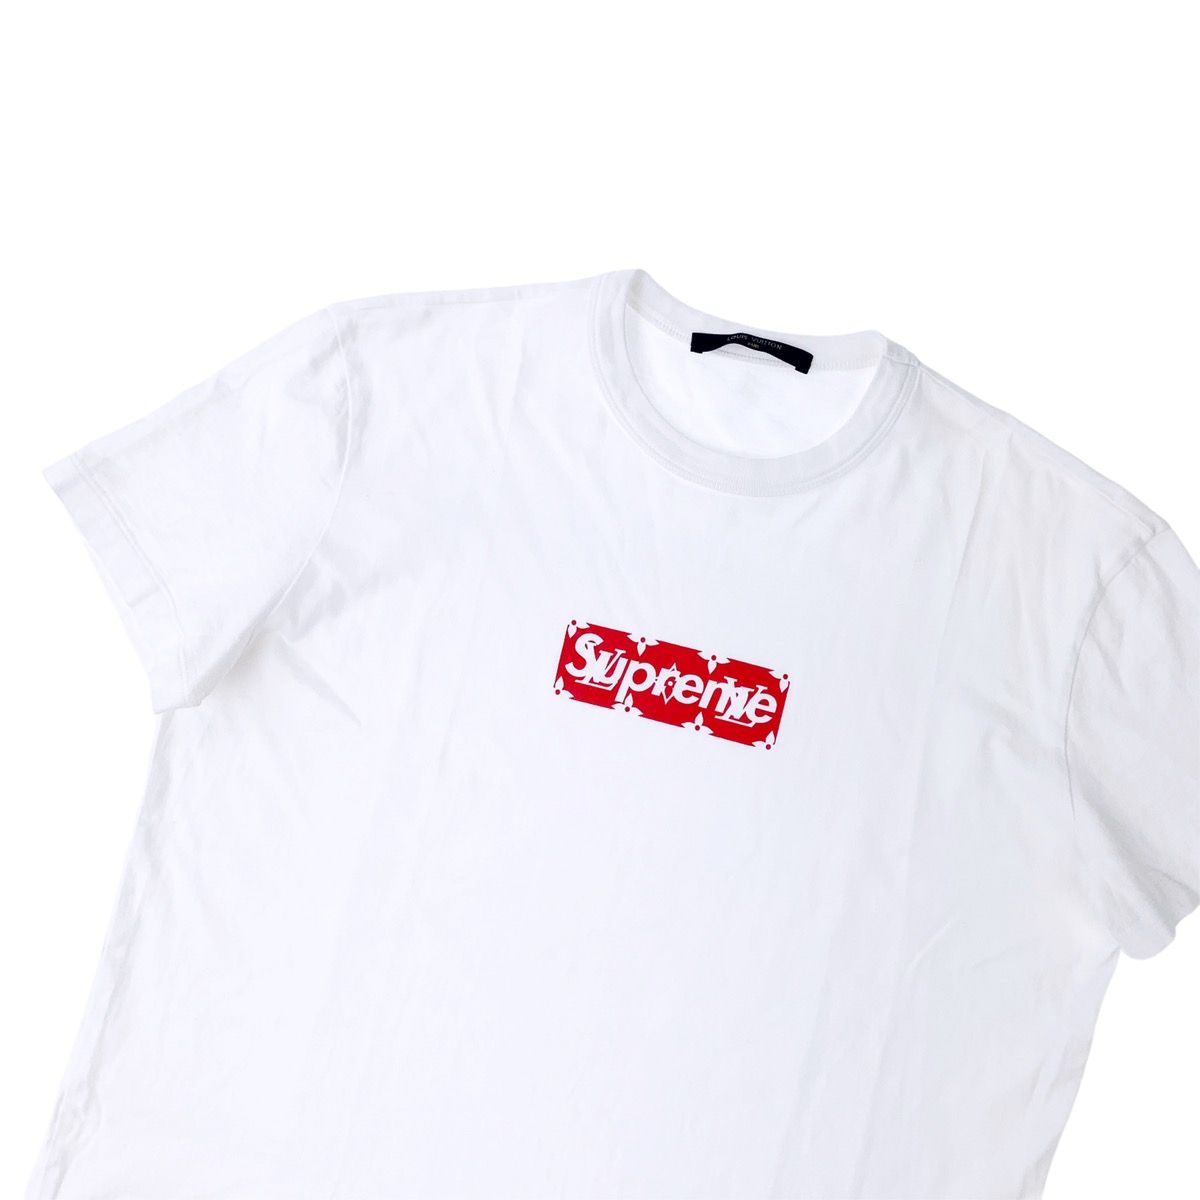 Supreme x Louis Vuitton Box Logo T-Shirt for Sale in Beverly Hills